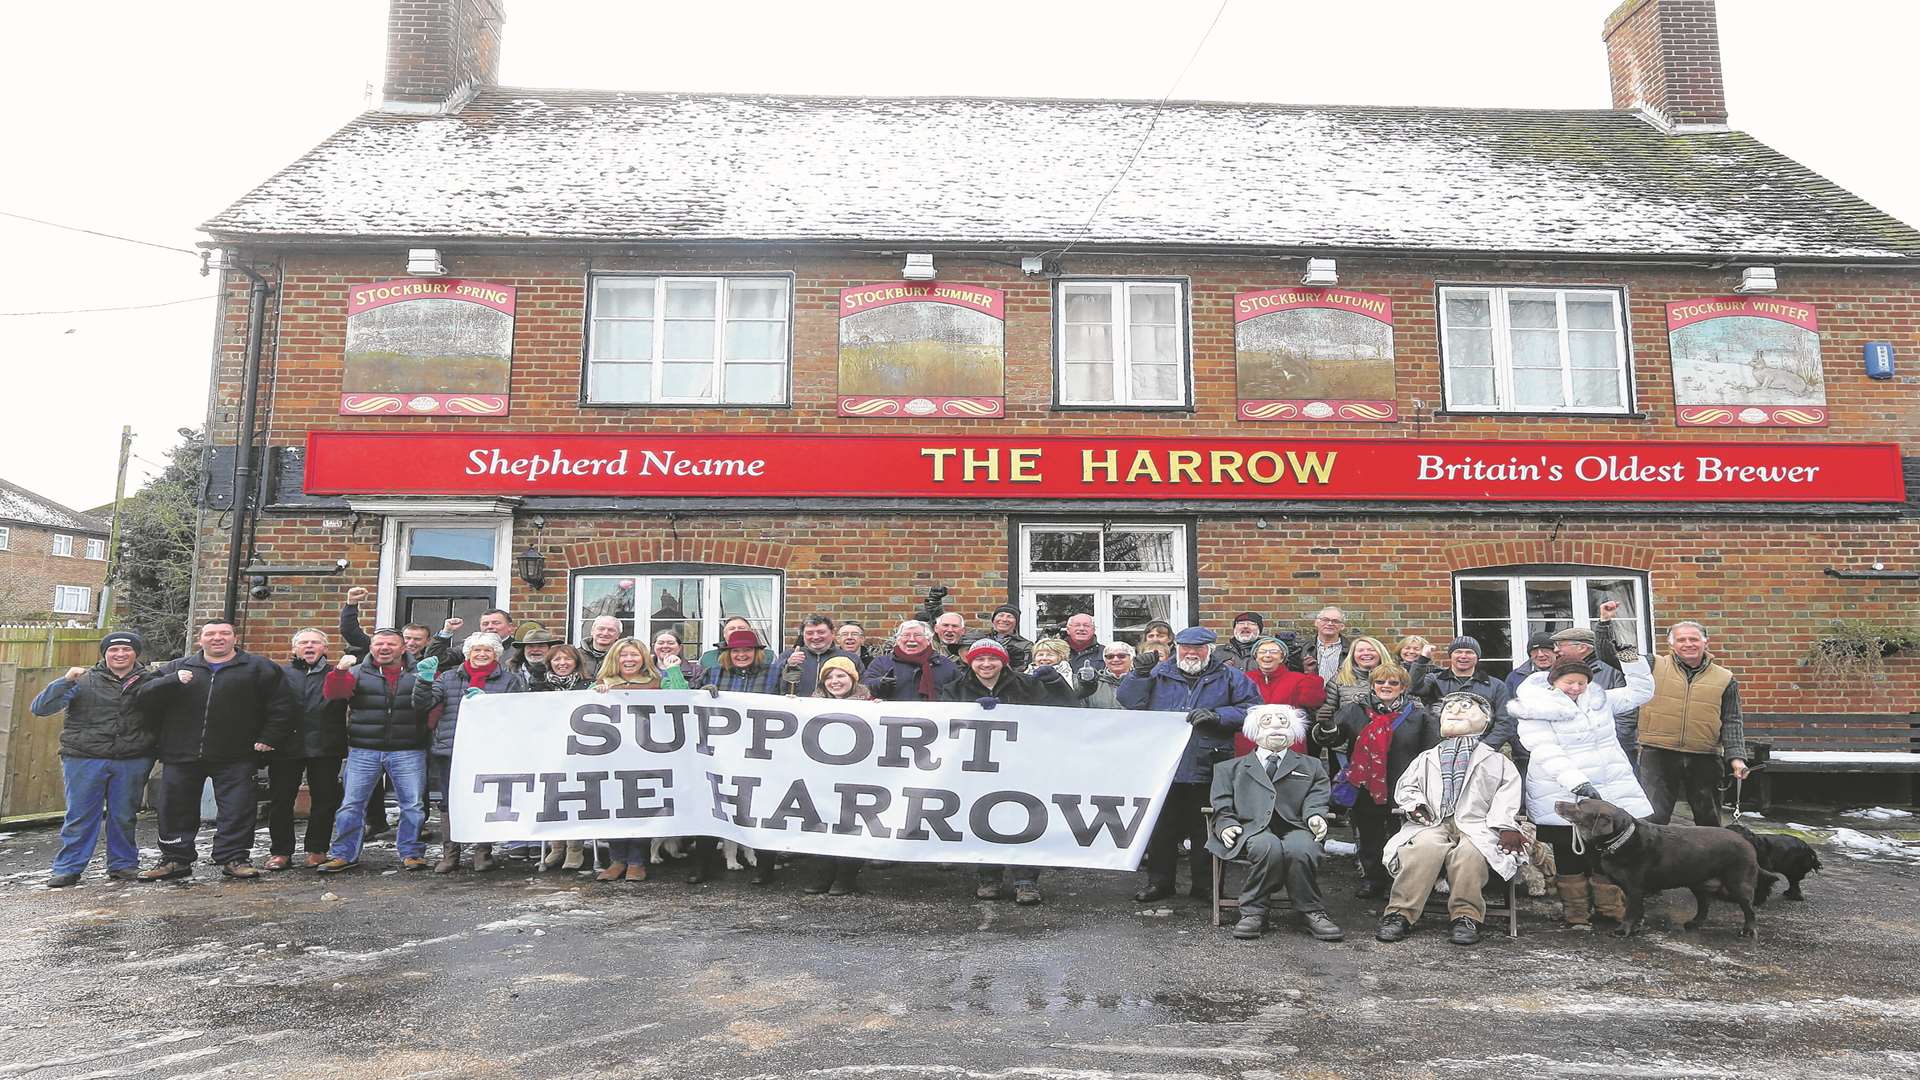 Supporters to turn The Harrow Pub into a community pub gather outside the premises.